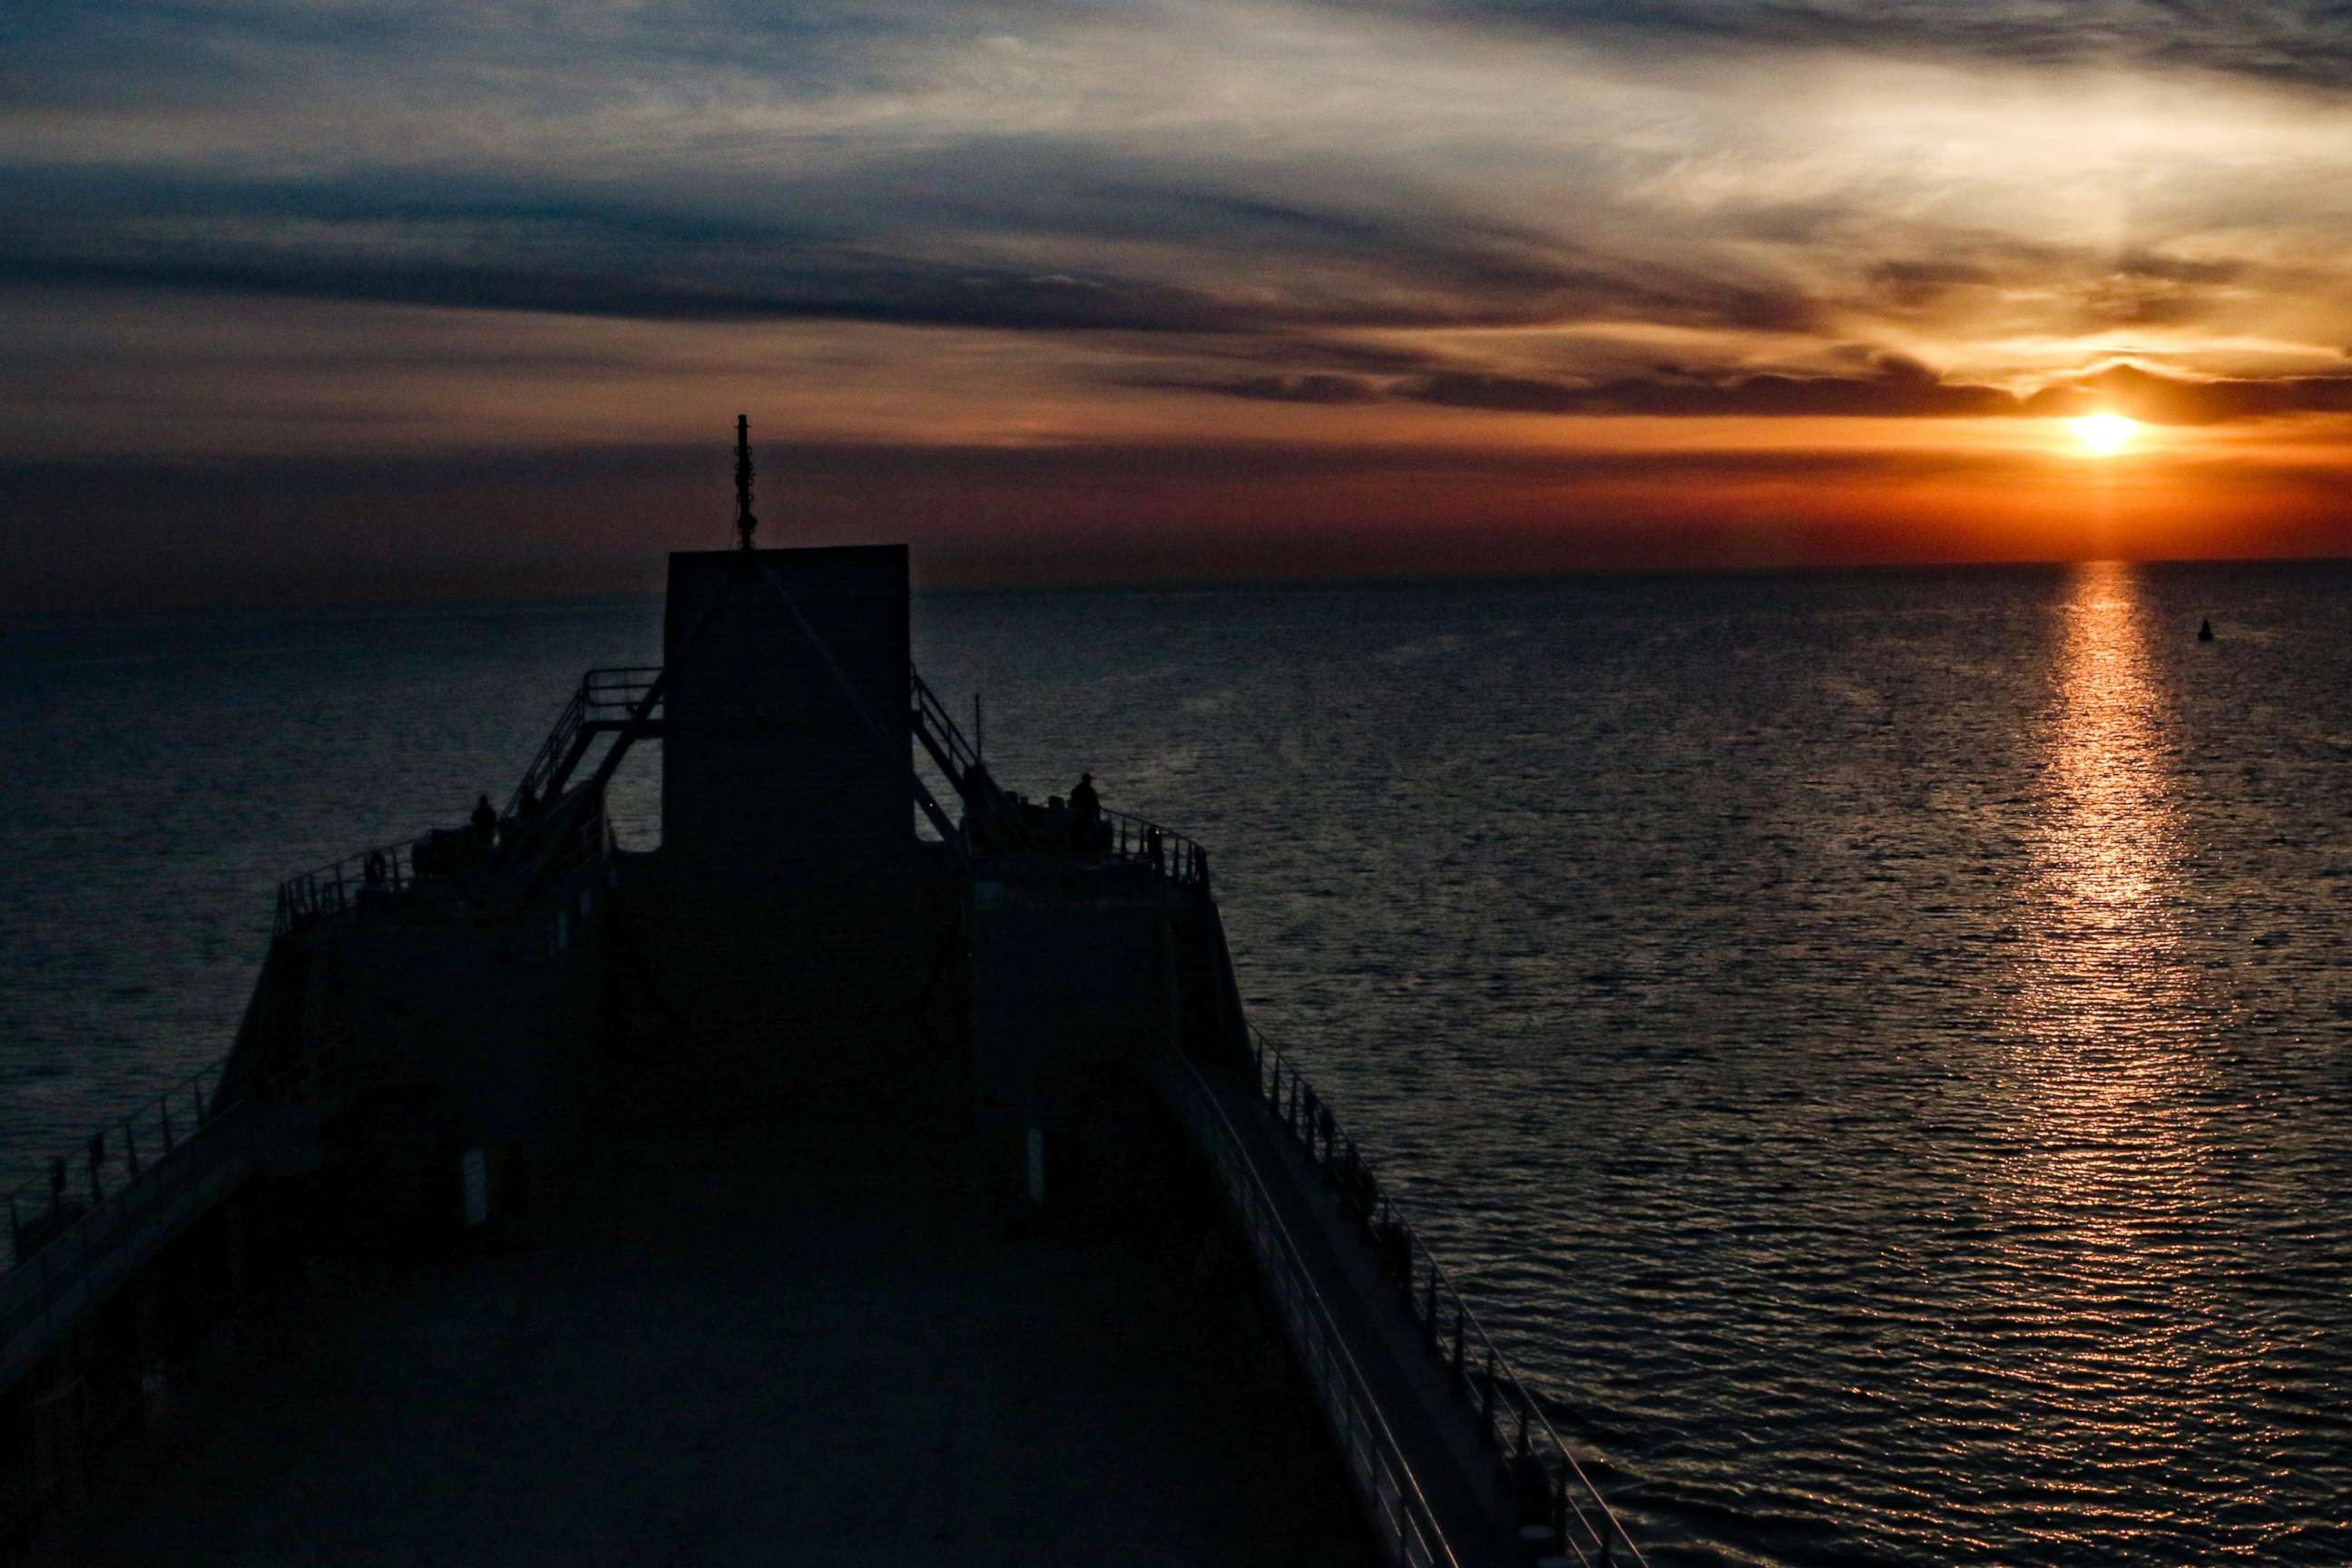 PHOTO: U.S. Army's Logistics Support Vessel Maj. Gen. Charles P. Gross (LSV 5) gets underway during a Northern Arabian Gulf sunrise March 13, 2019.